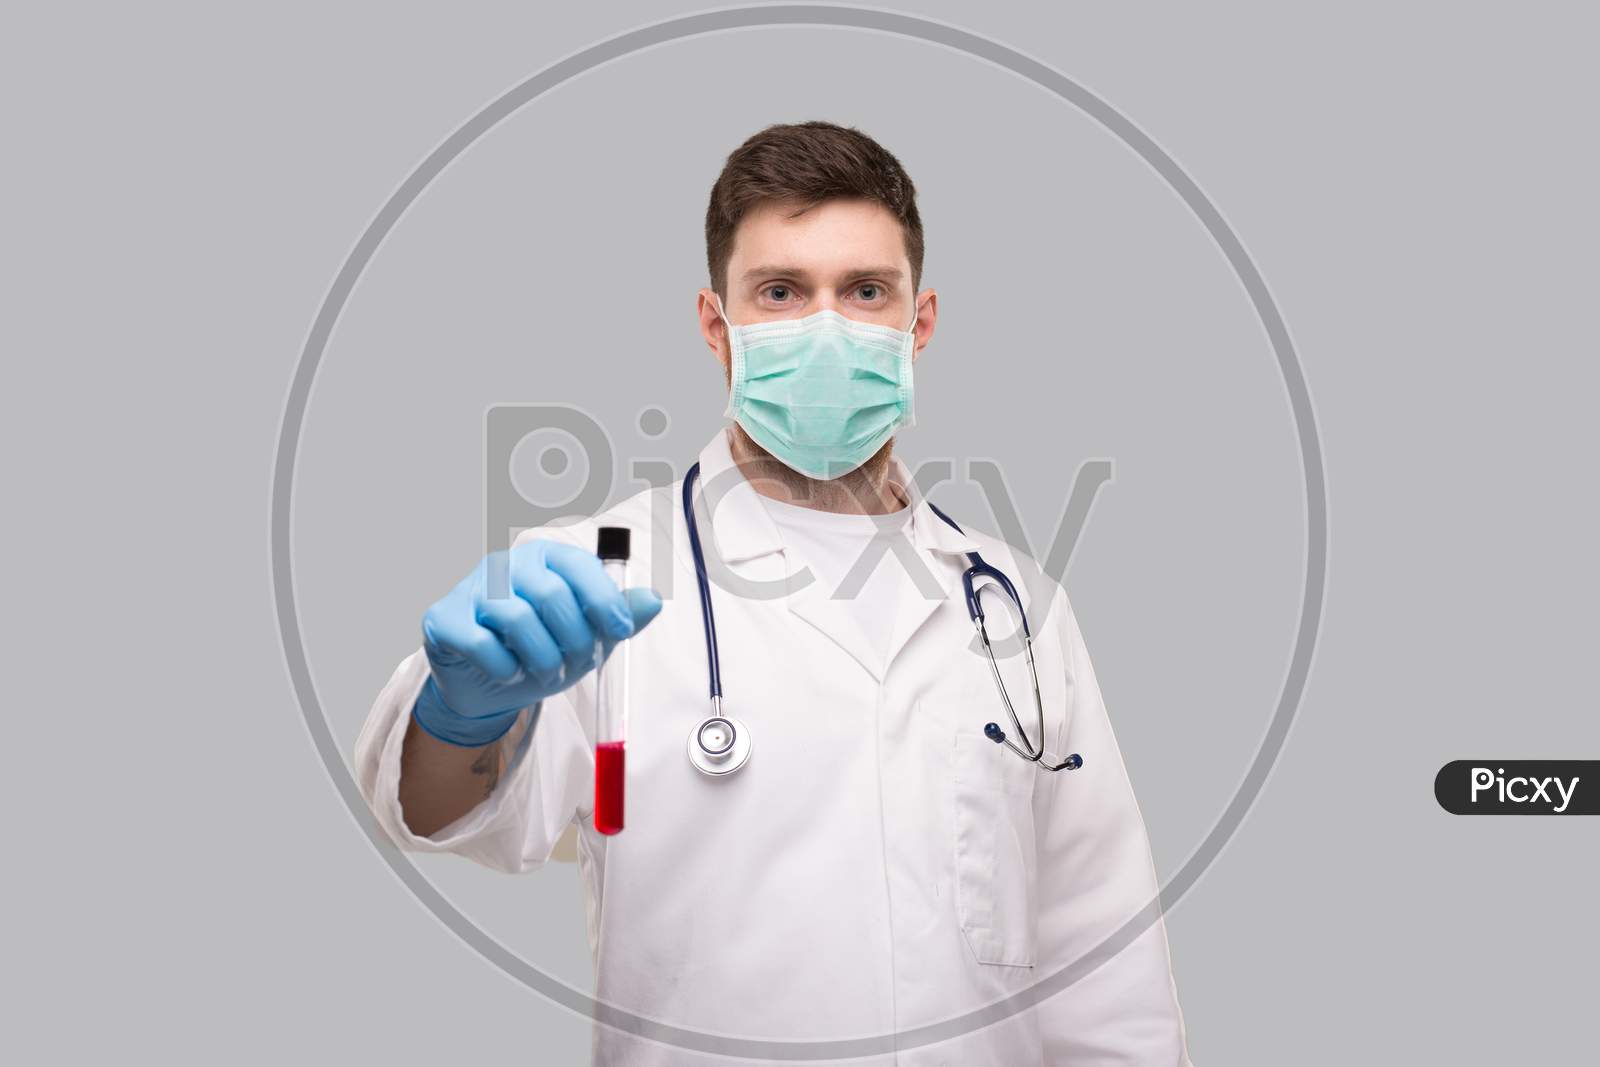 Male Doctor Showing Blood Analysis Wearing Medical Mask And Gloves. Laboratory Virus Concept